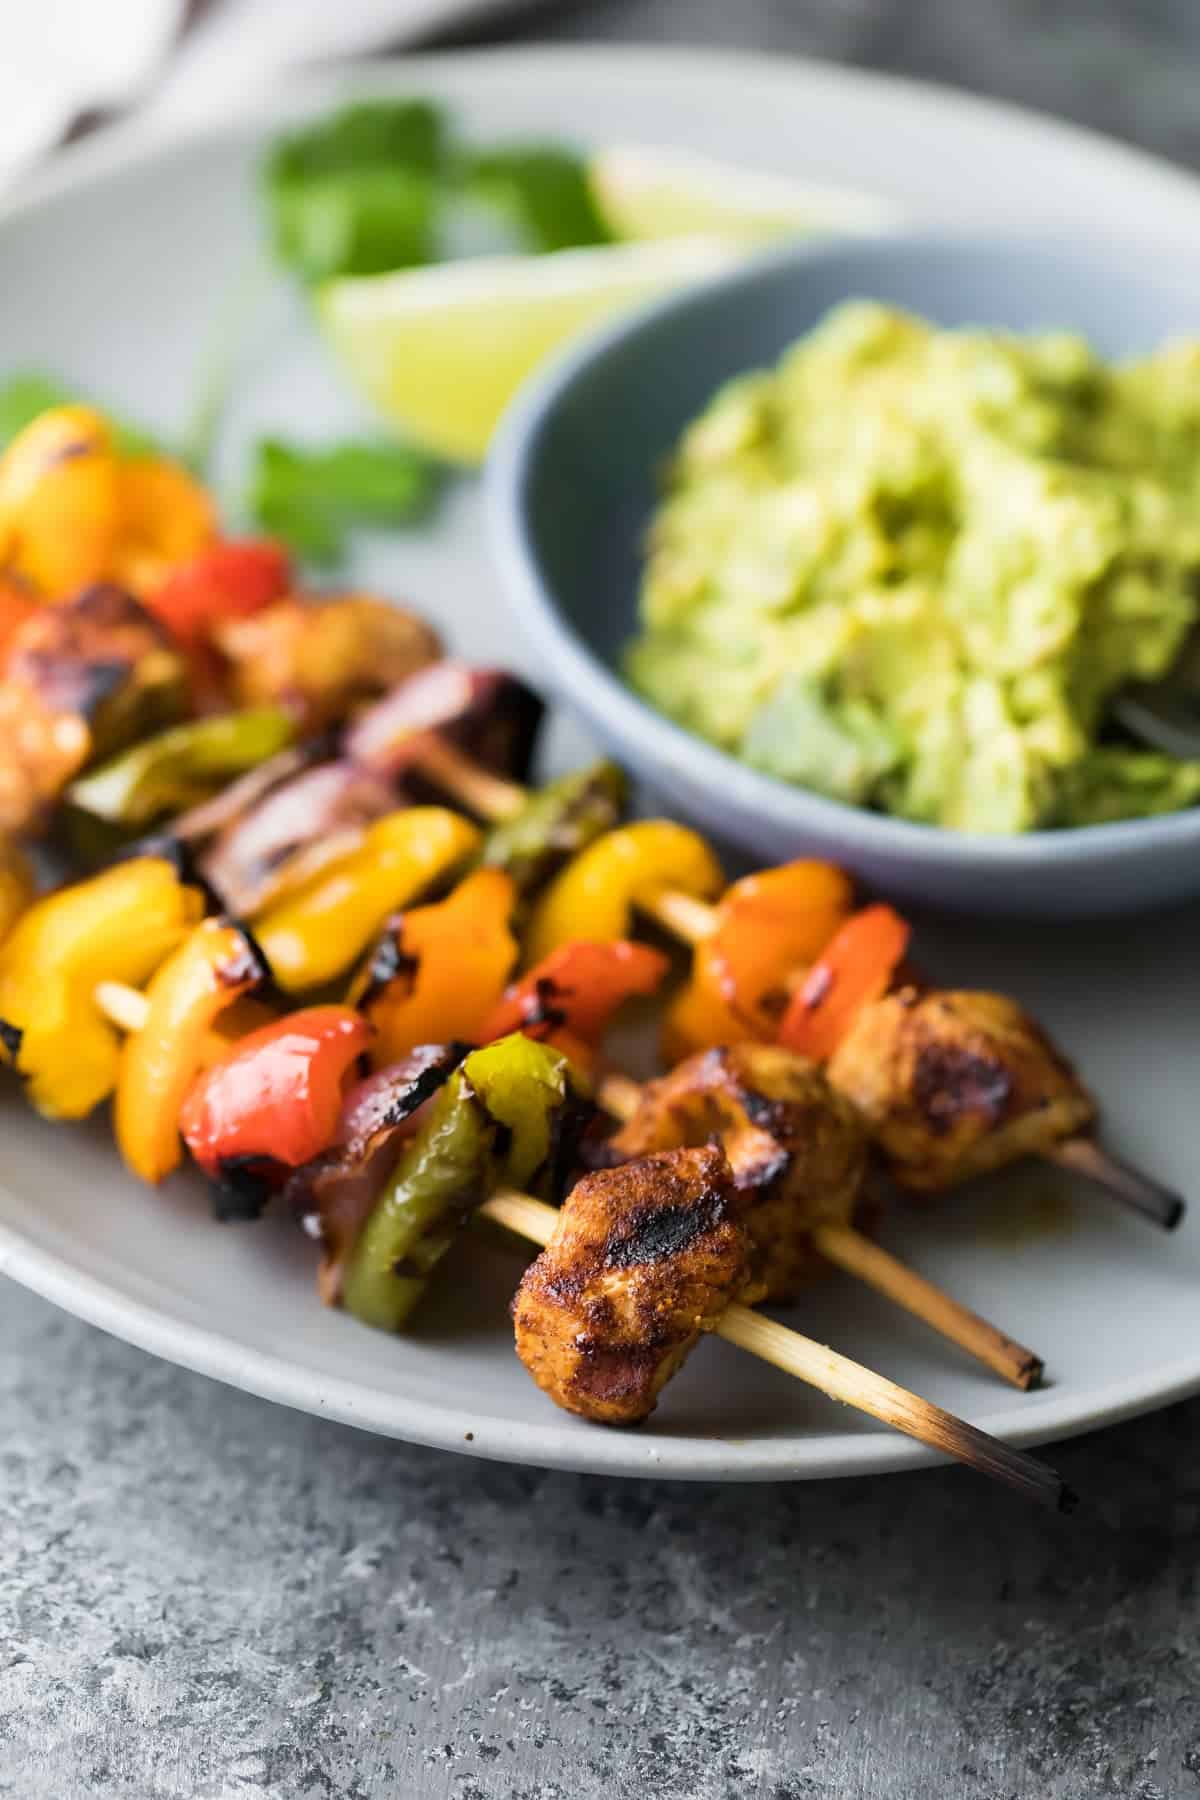 Grilled Chicken Fajita Skewers cooked and plated with wedges of lime and bowl of guacamole - one of the recipes for this week's healthy weekly meal plan